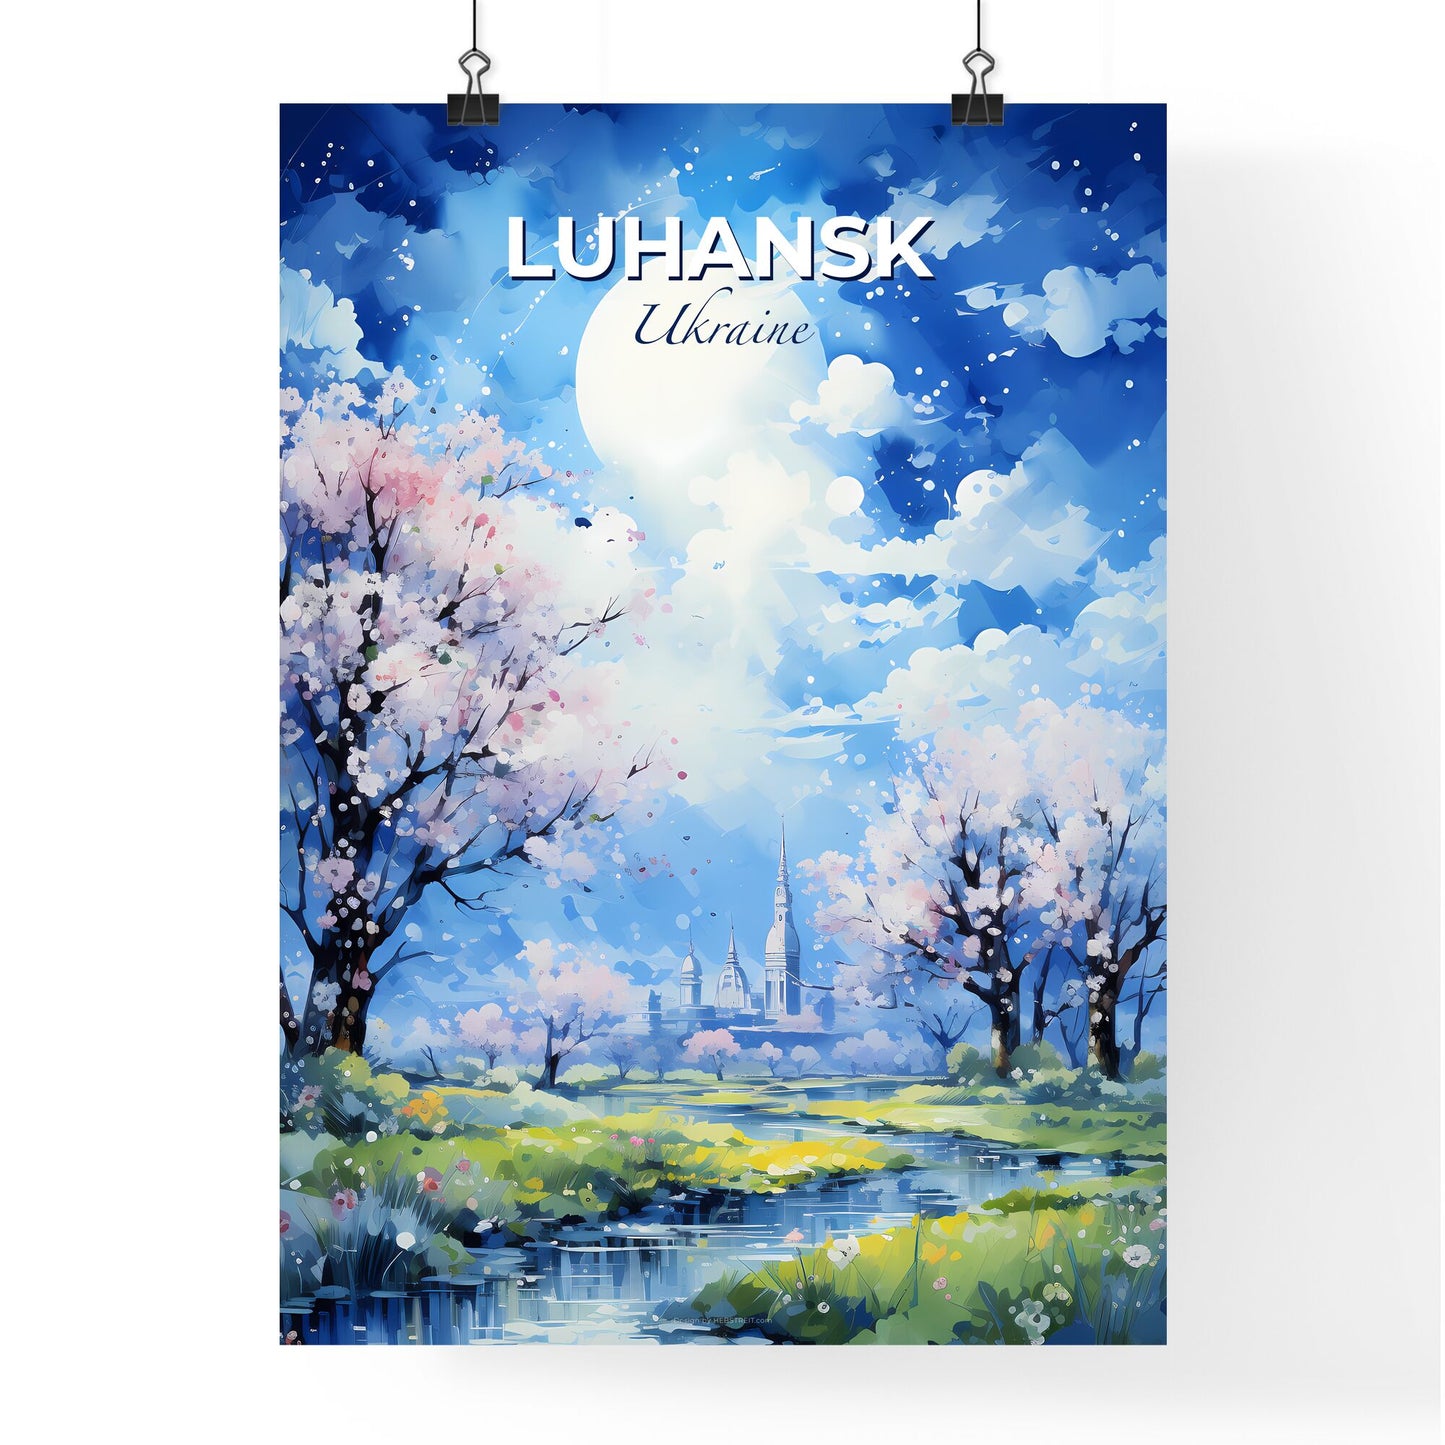 Luhansk Ukraine Skyline - A Painting Of A Landscape With Trees And A River - Customizable Travel Gift Default Title